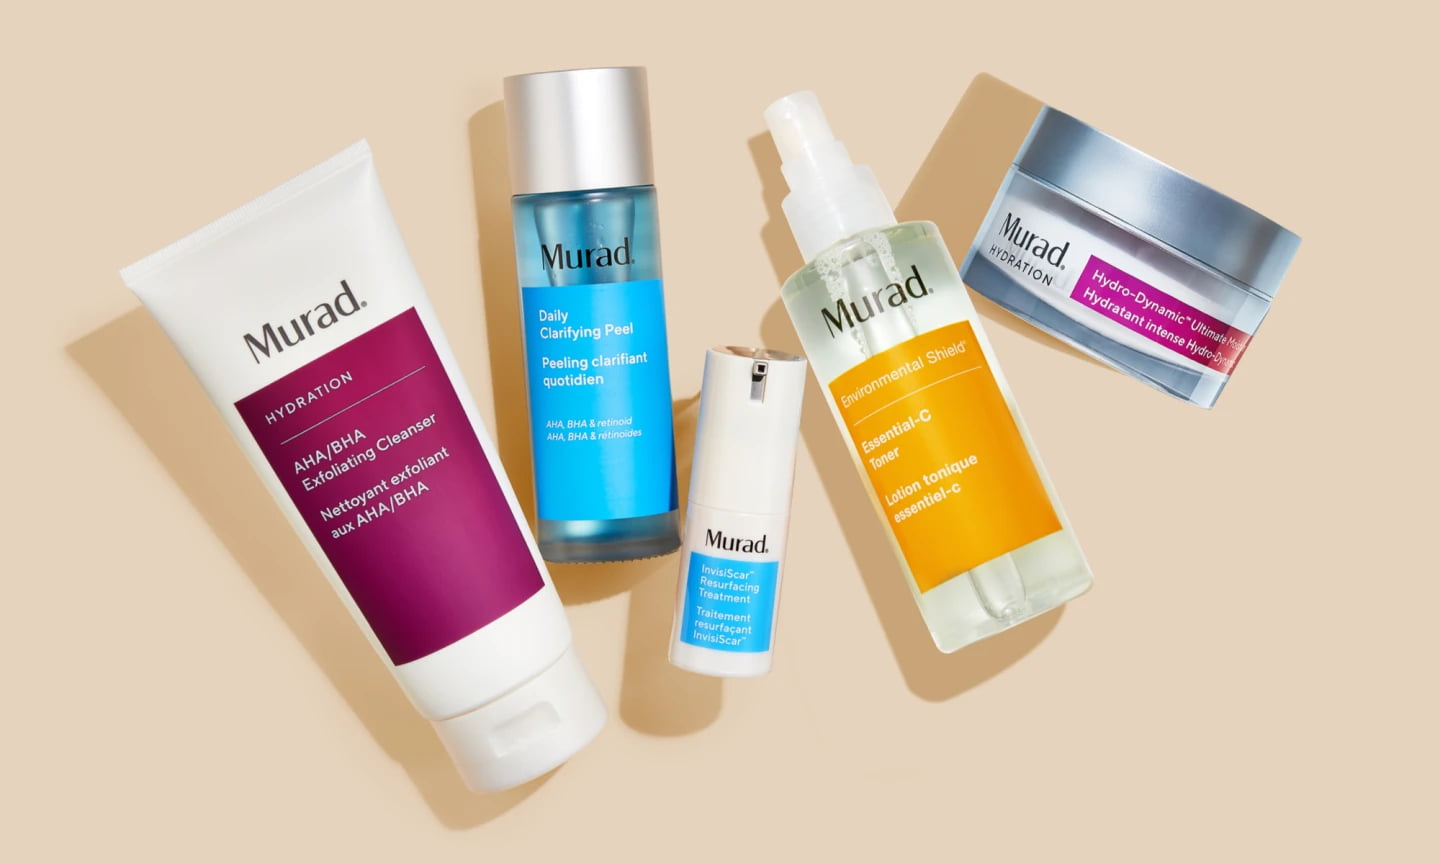 Up to 50% off summer sale at Murad